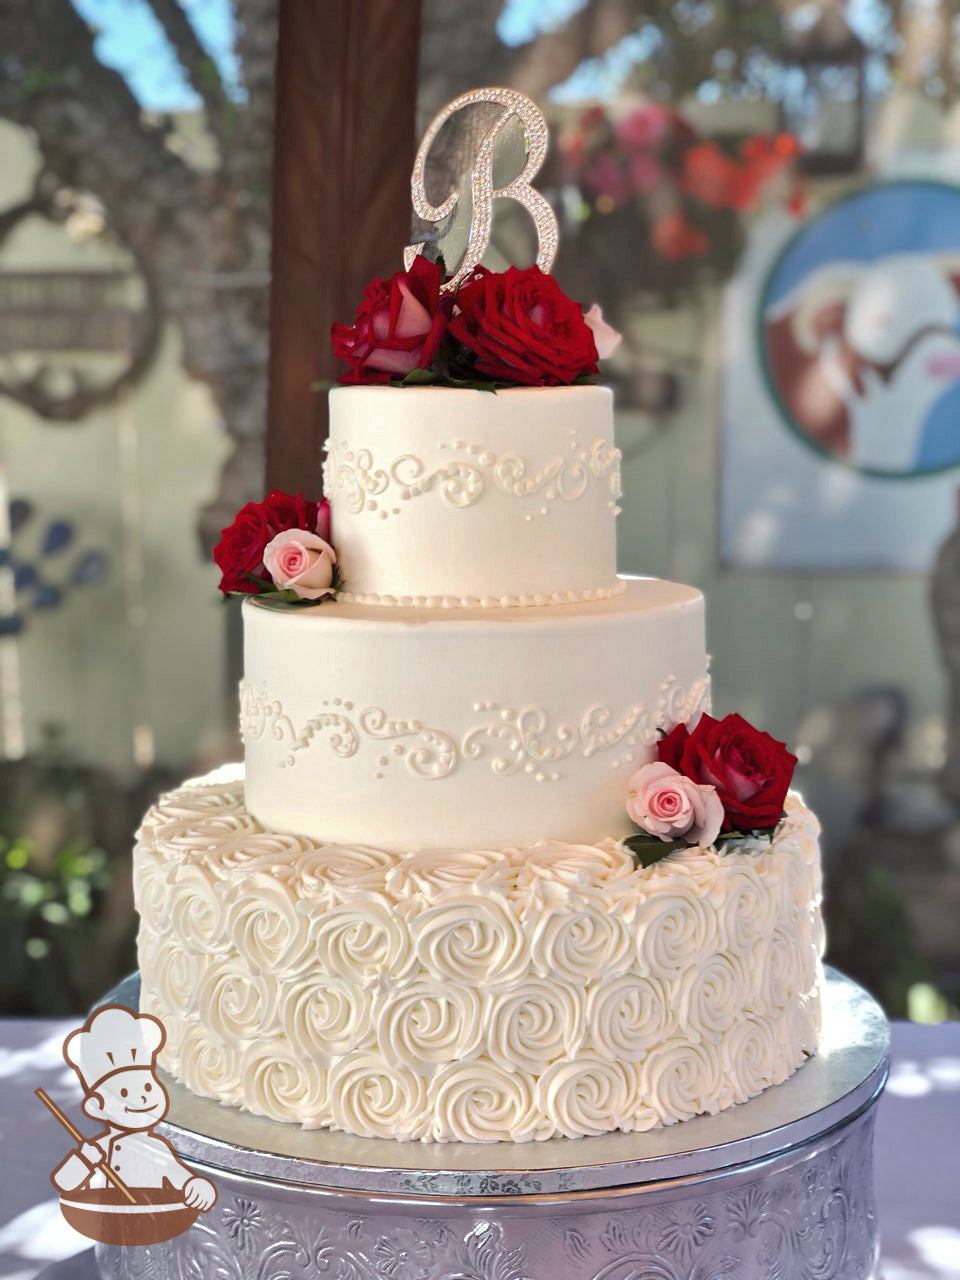 3 Tier round buttercream wedding cake with rosette swirl base and smooth white top tiers and elegant piping and decorated with fresh roses.